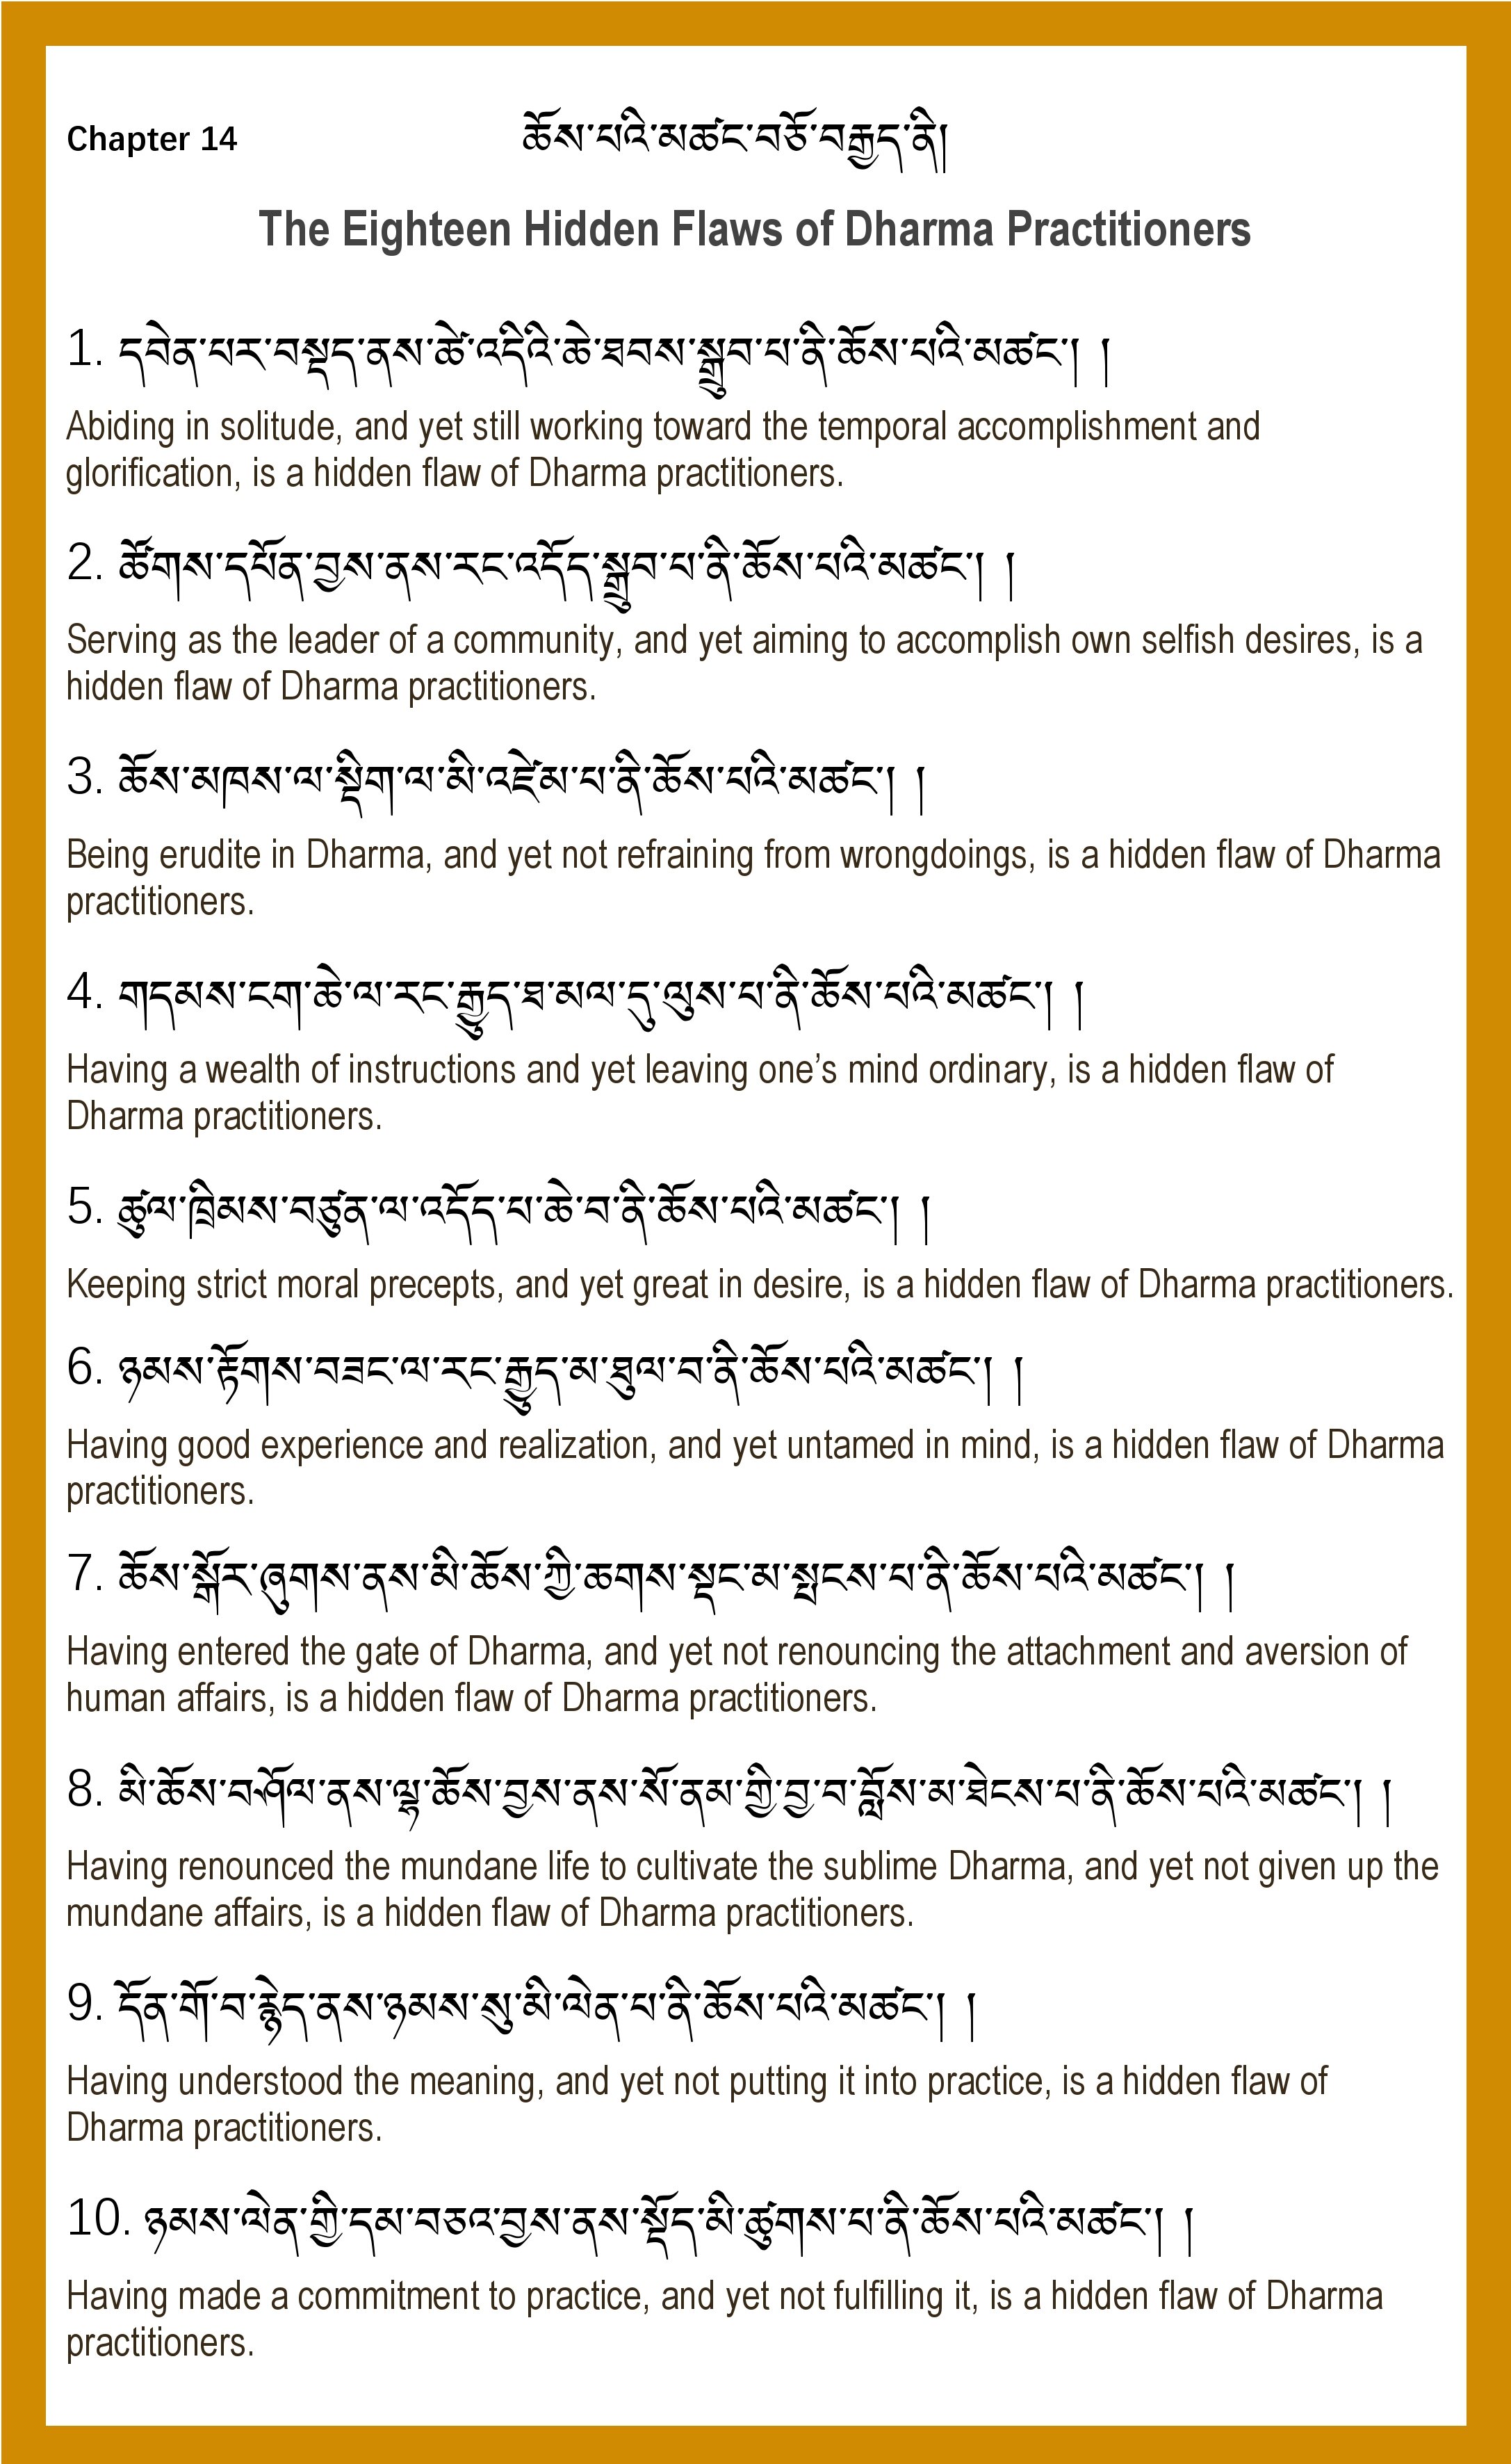 14-PGSP-The 18 Flaws of Dharma Practitioners0003.jpg